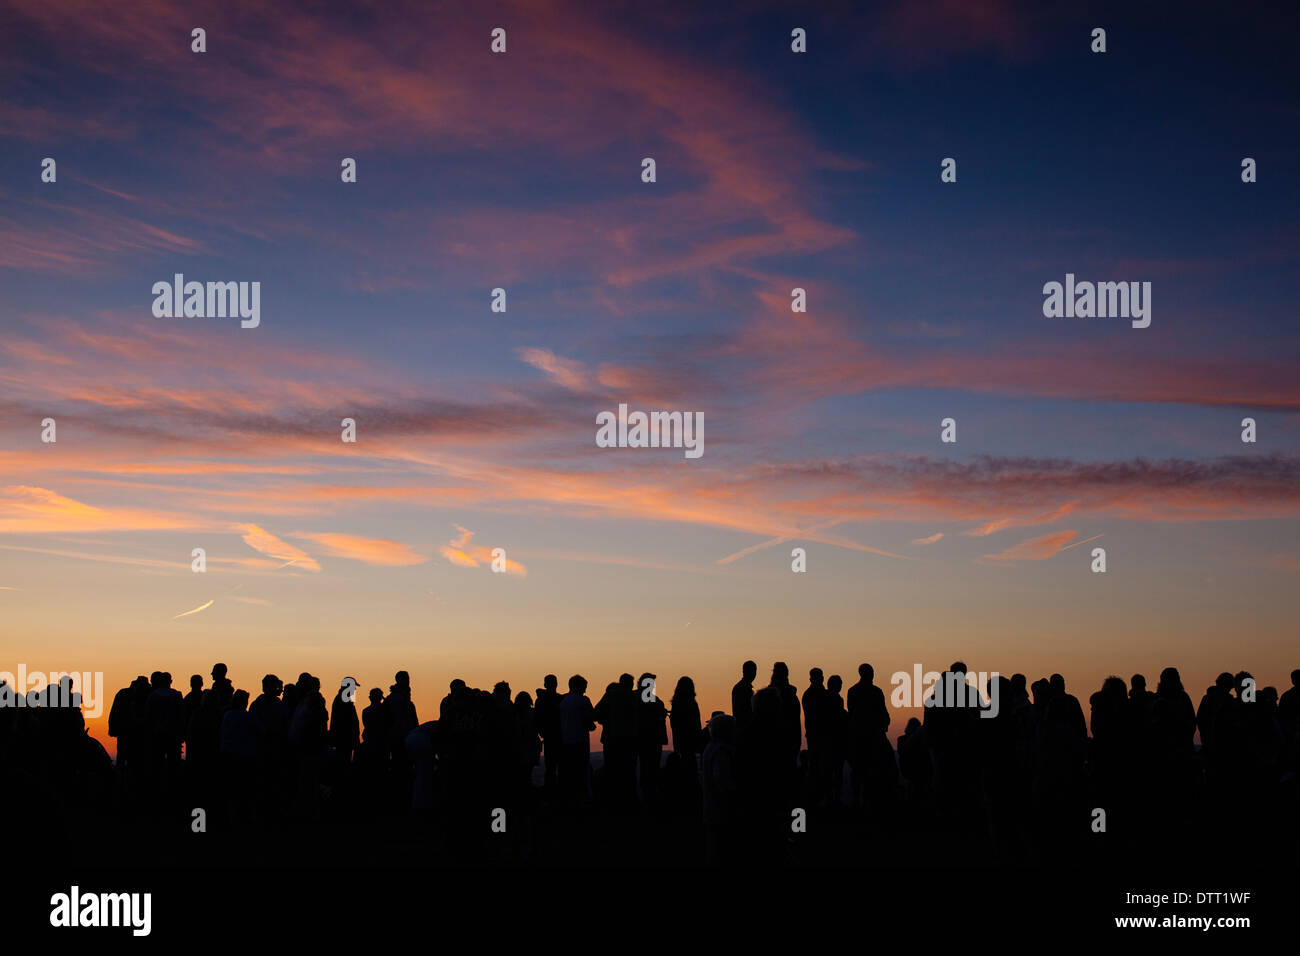 A large crowd of people against a sunset sky. Stock Photo